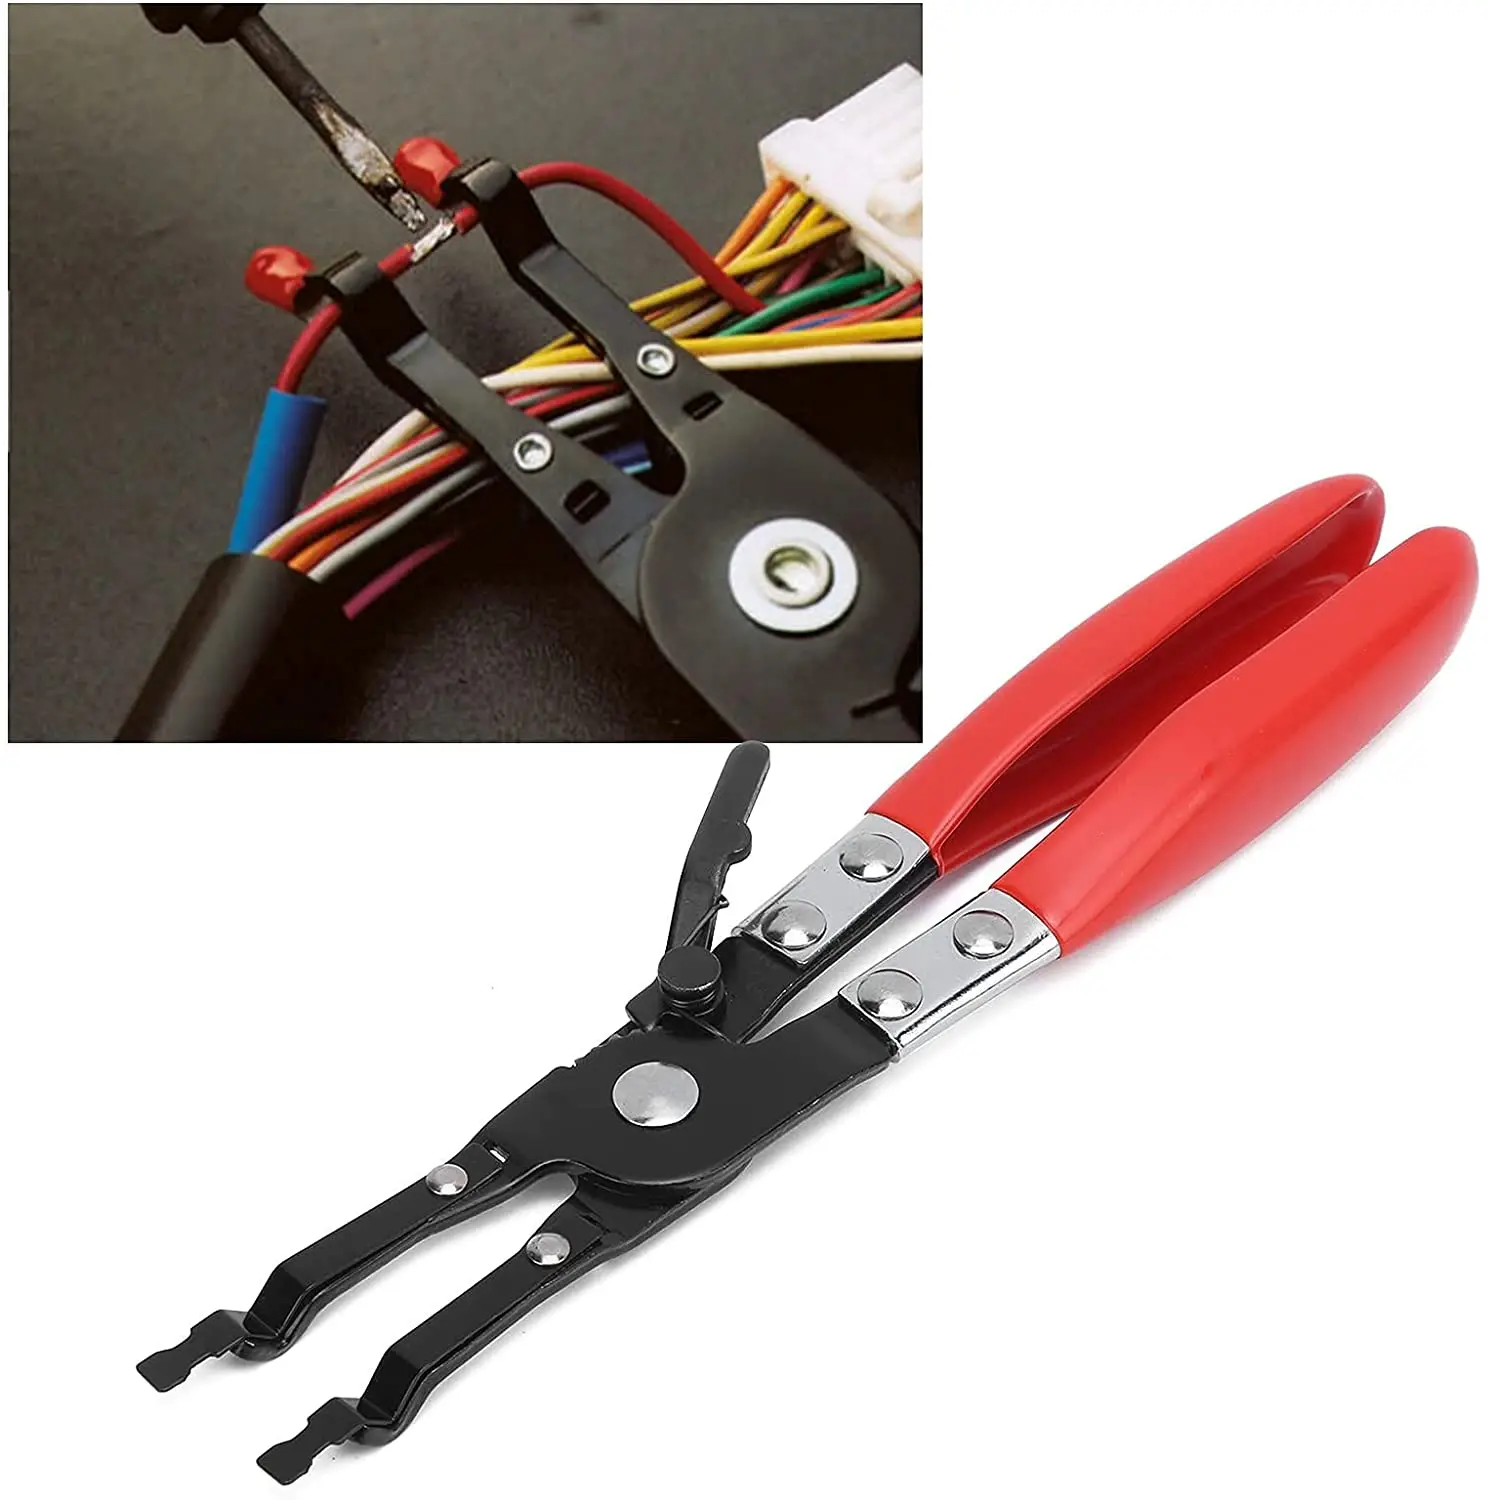 

Universal Car Vehicle Repair Tool Soldering Aid Plier Hold 2 Wires While Innovative Car Garage Hand Tools